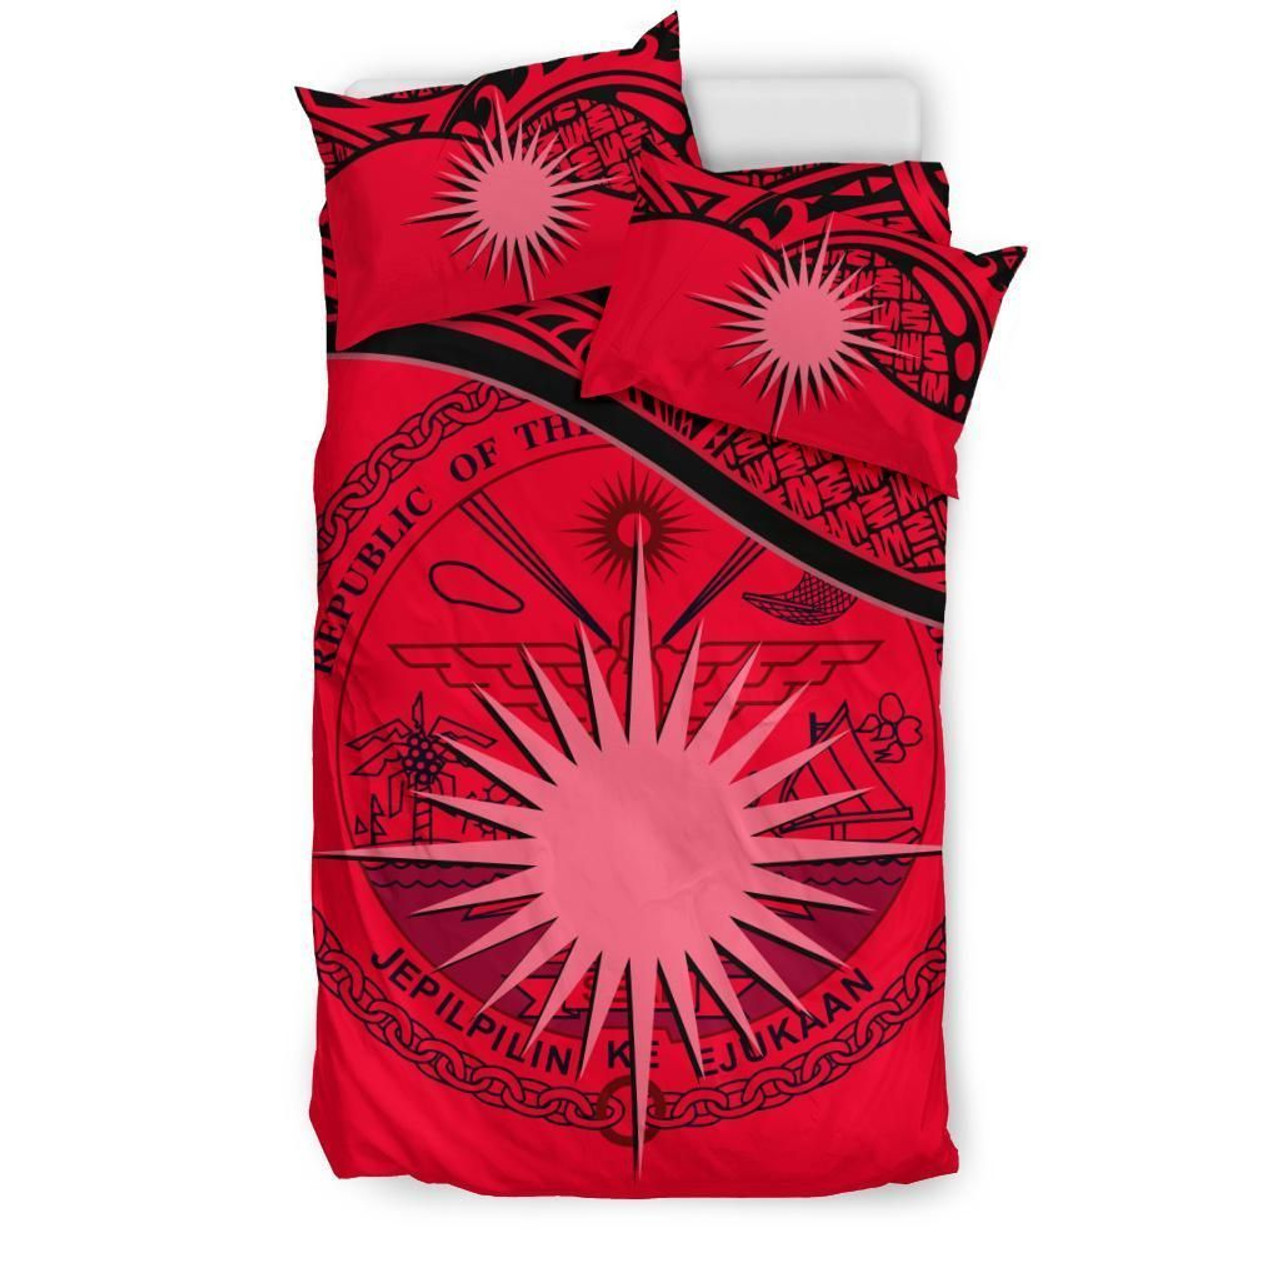 Marshall Islands Duvet Cover Set - Marshall Islands Coat Of Arms & Flag Red 3